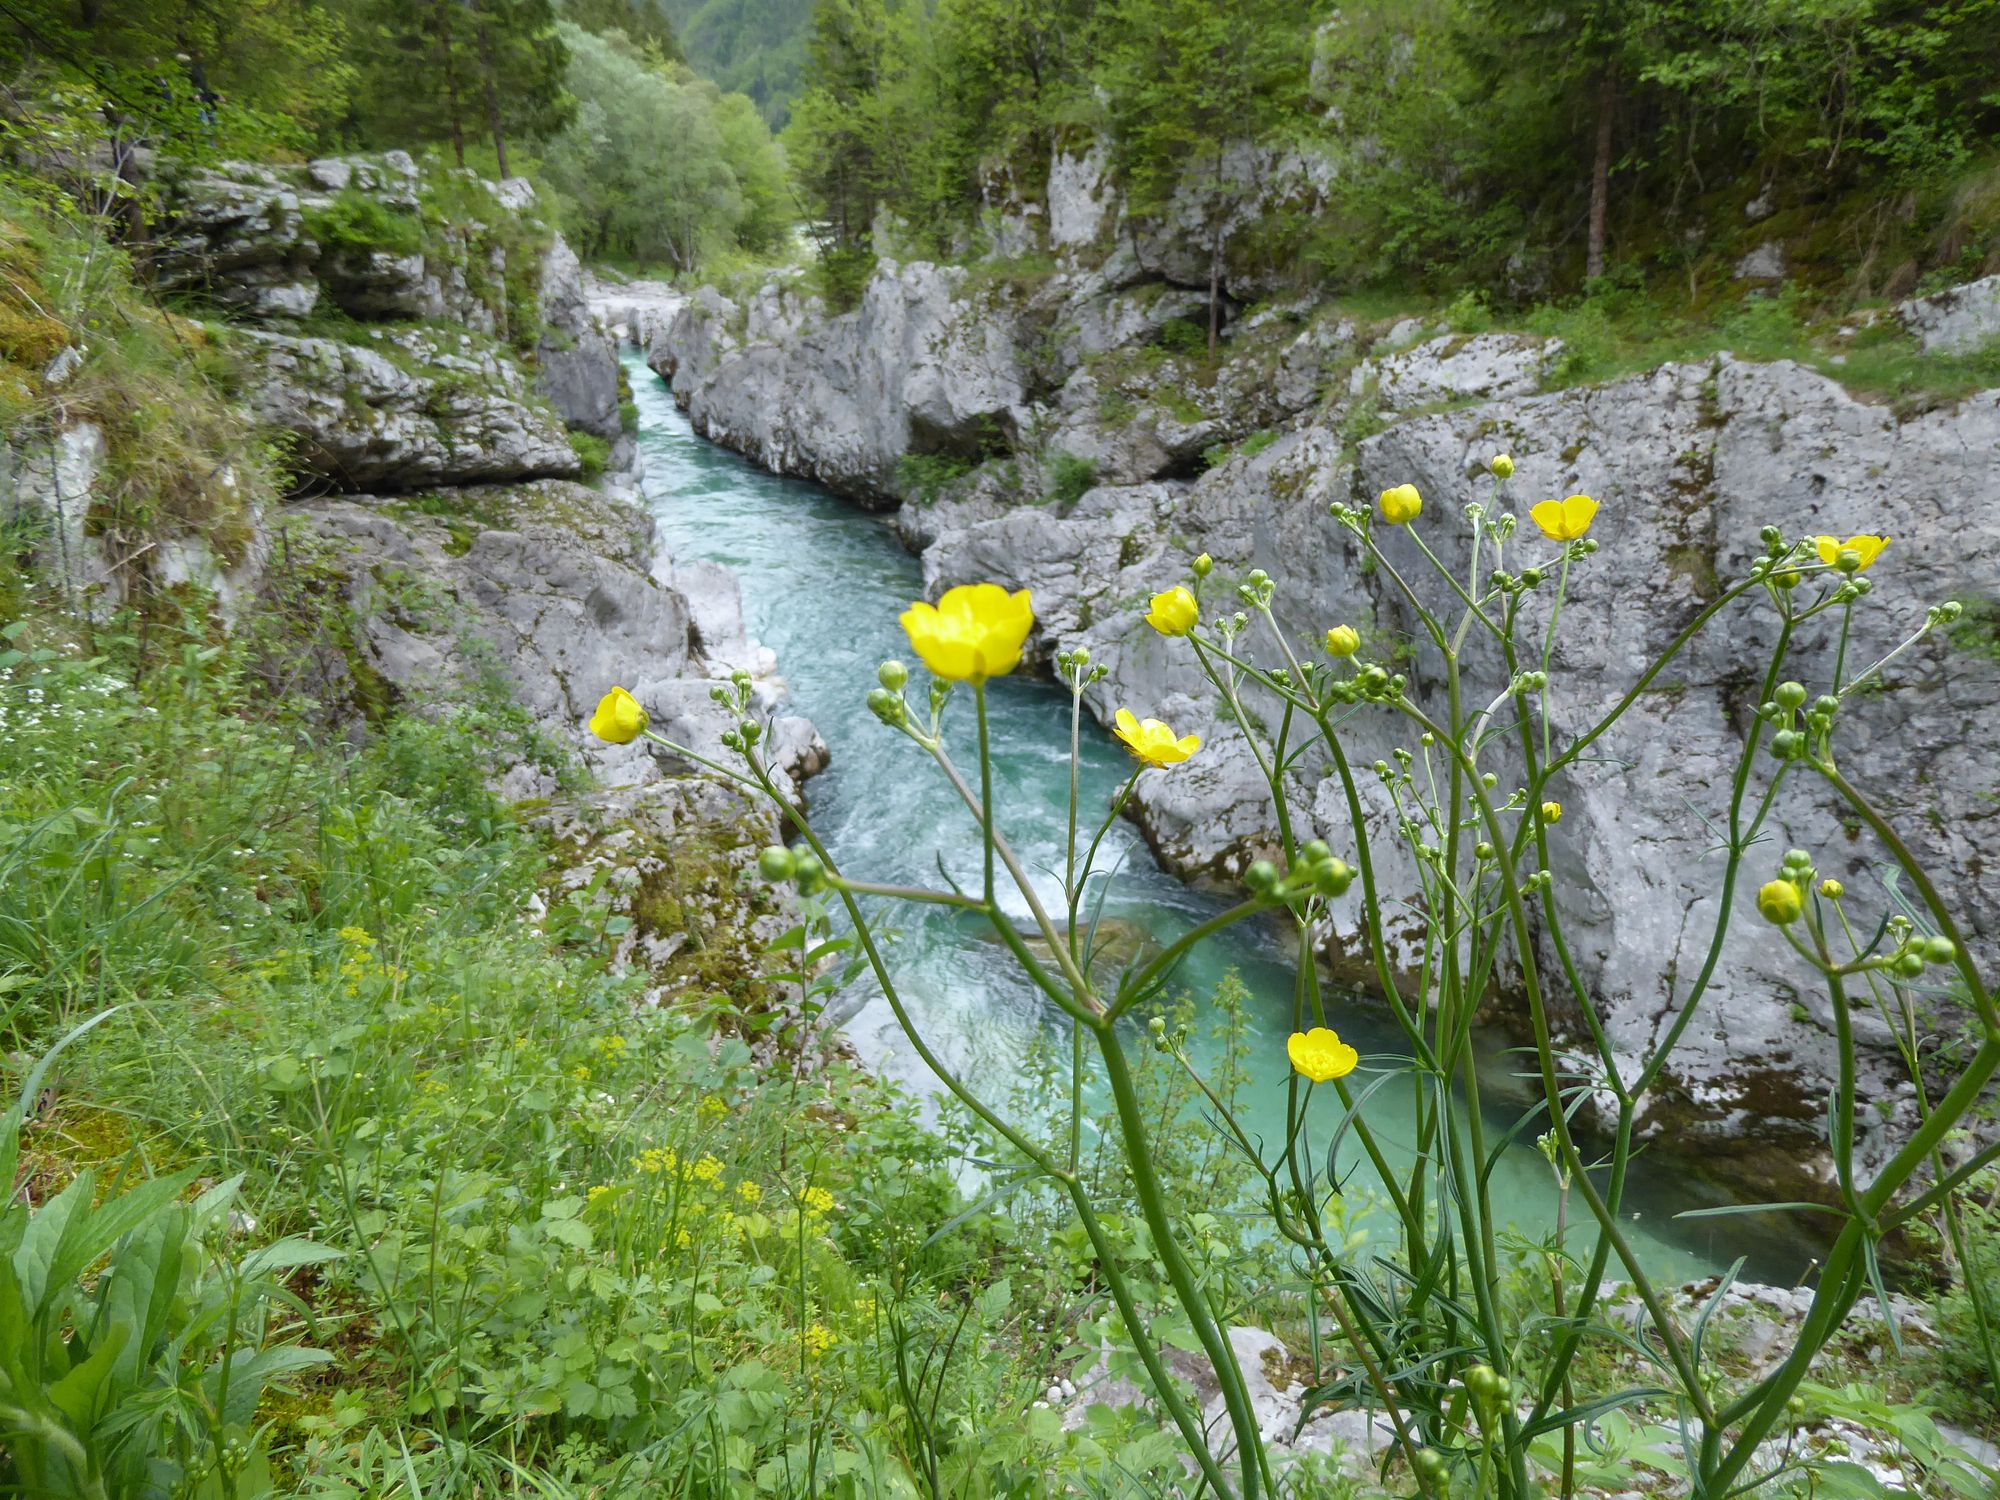 The Soča Valley: All quiet on the Isonzo Front